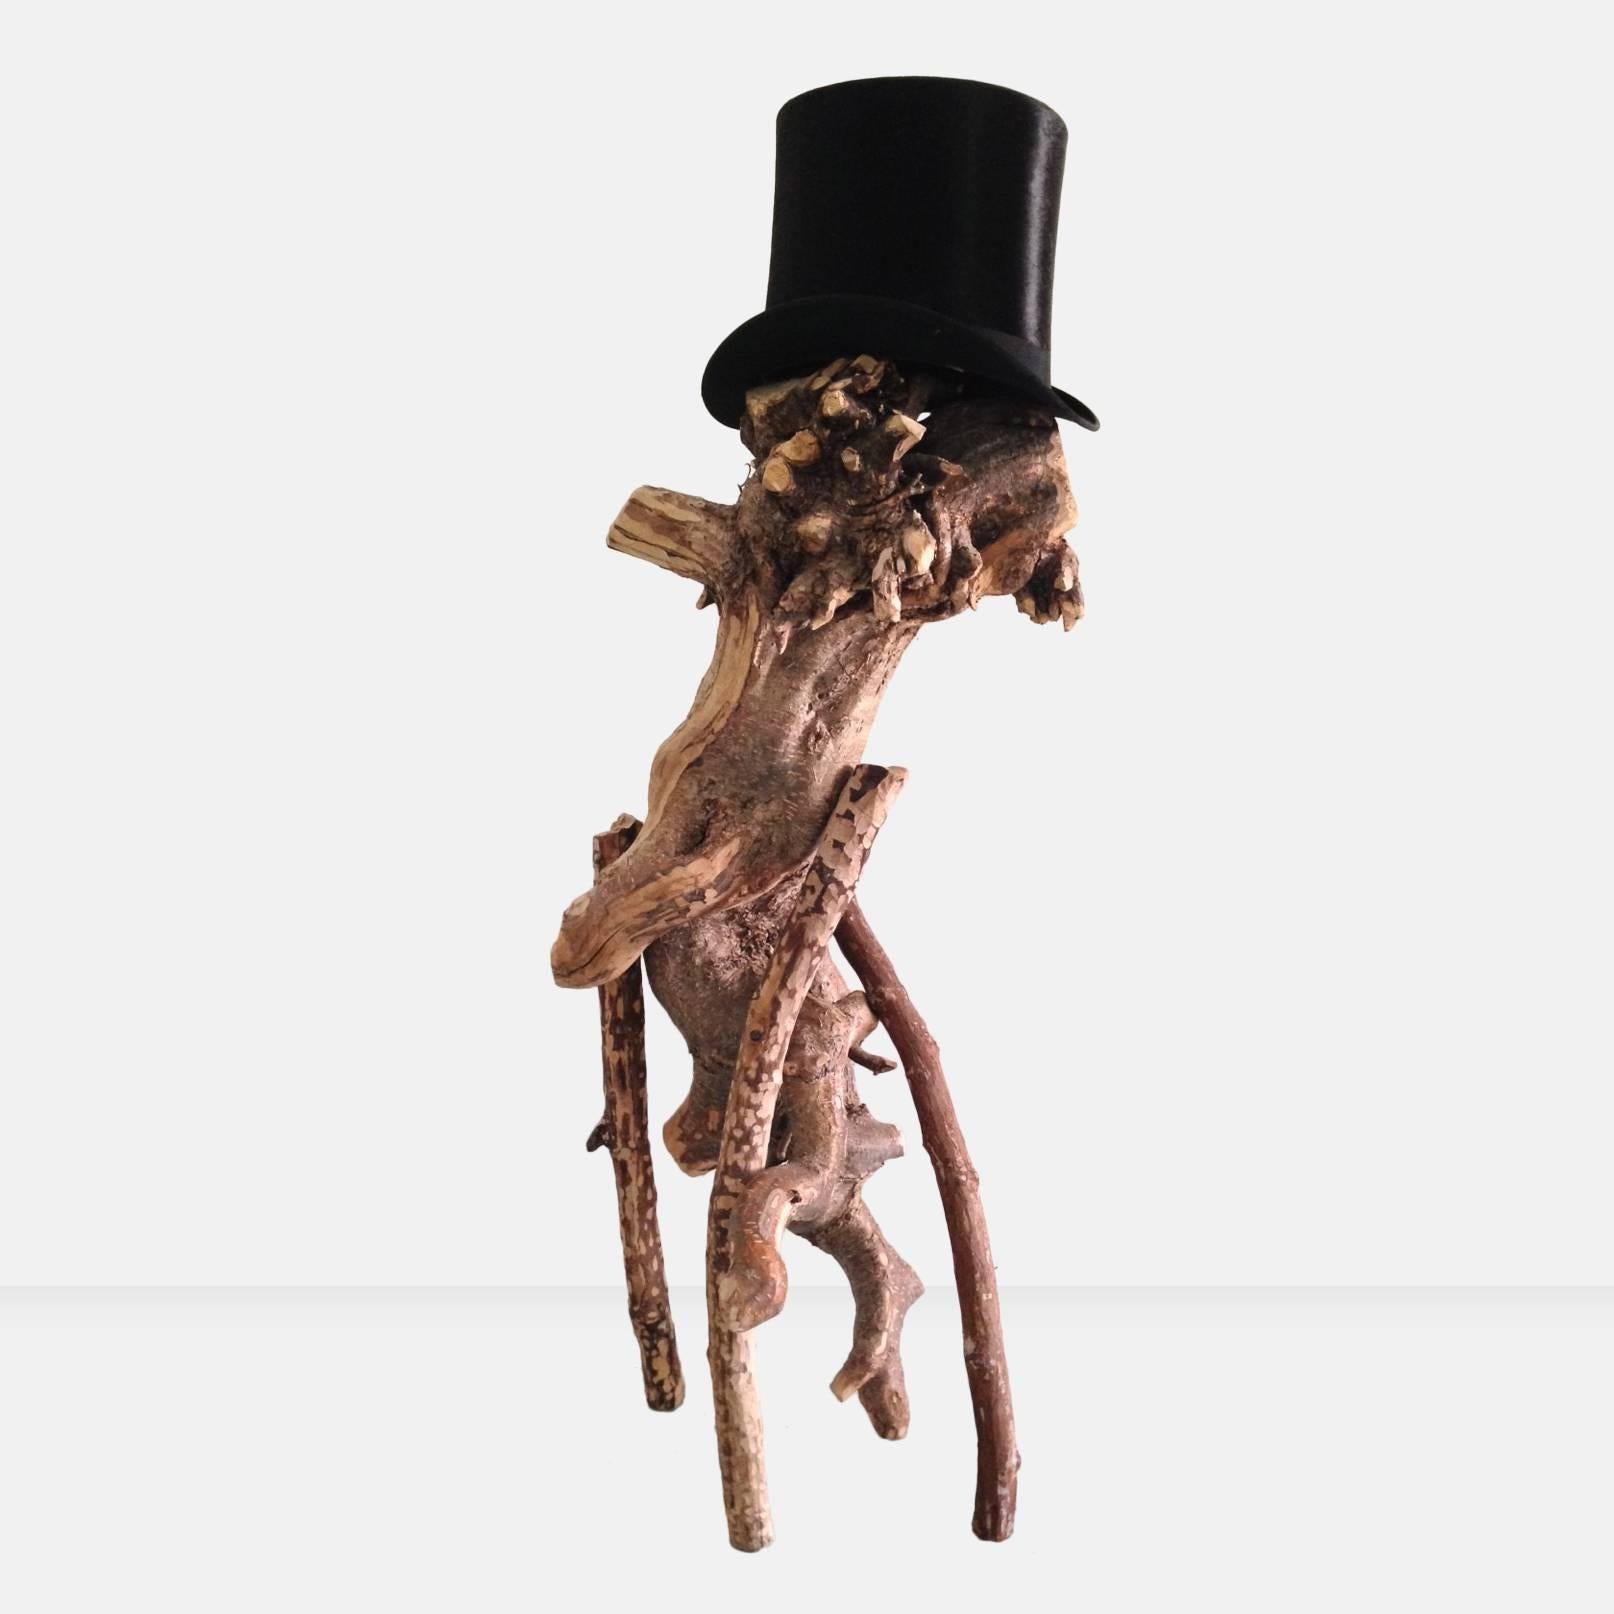 Main body hand-carved reclaimed tree root with carved maple and rosewood branches Sculpture with top hat (circa 1900) resting on top of the sculpture; hand-carved (without hat); Andrew Plum’s abstract wood sculpture, impression of the famous rock